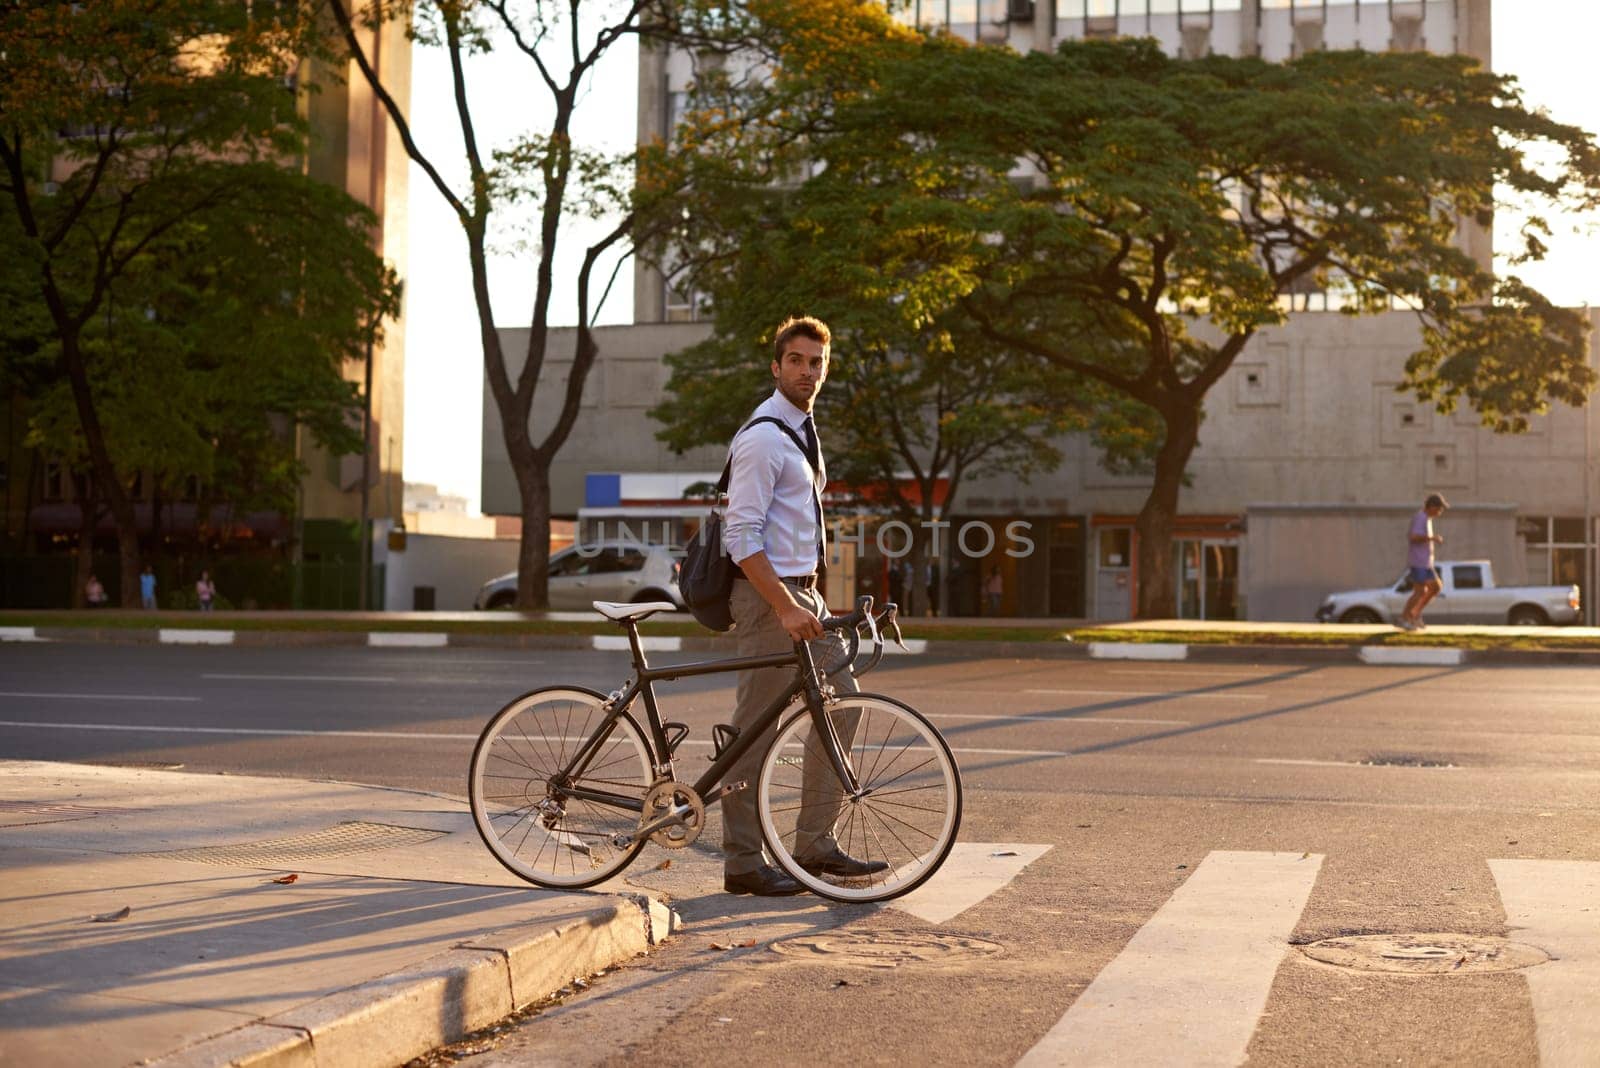 Crosswalk, bike and business man in city for morning, sustainable travel and carbon footprint. Cycling, transportation and urban with employee walking on commute for journey, transit and professional.